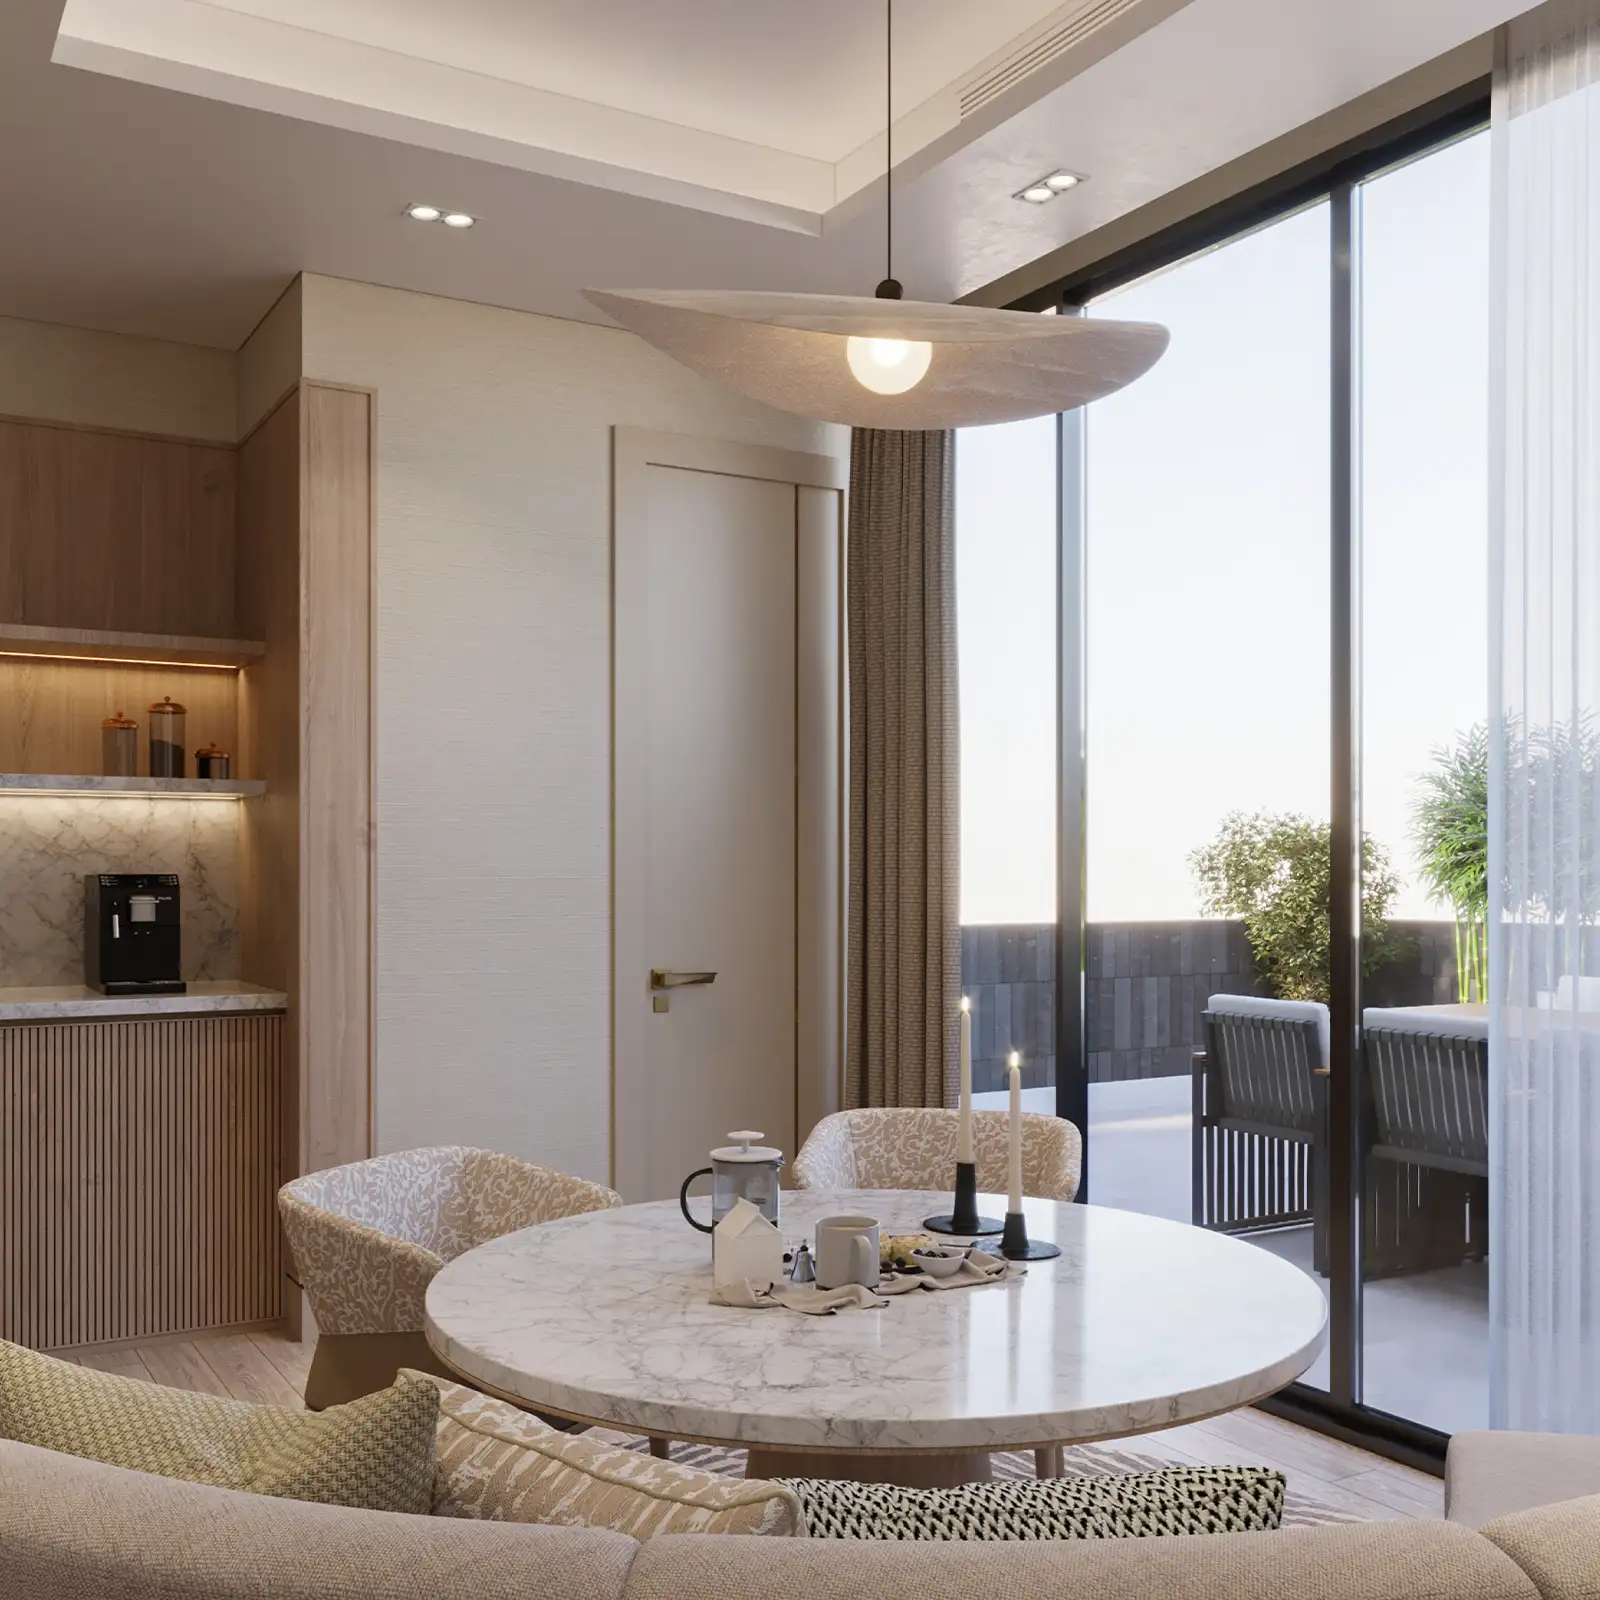 Contemporary interior design in a breakfast nook with a marble table, textured fabric chairs, and a wooden kitchenette, accented by a modern pendant light and floor-to-ceiling windows that offer natural light and a view of the terrace.